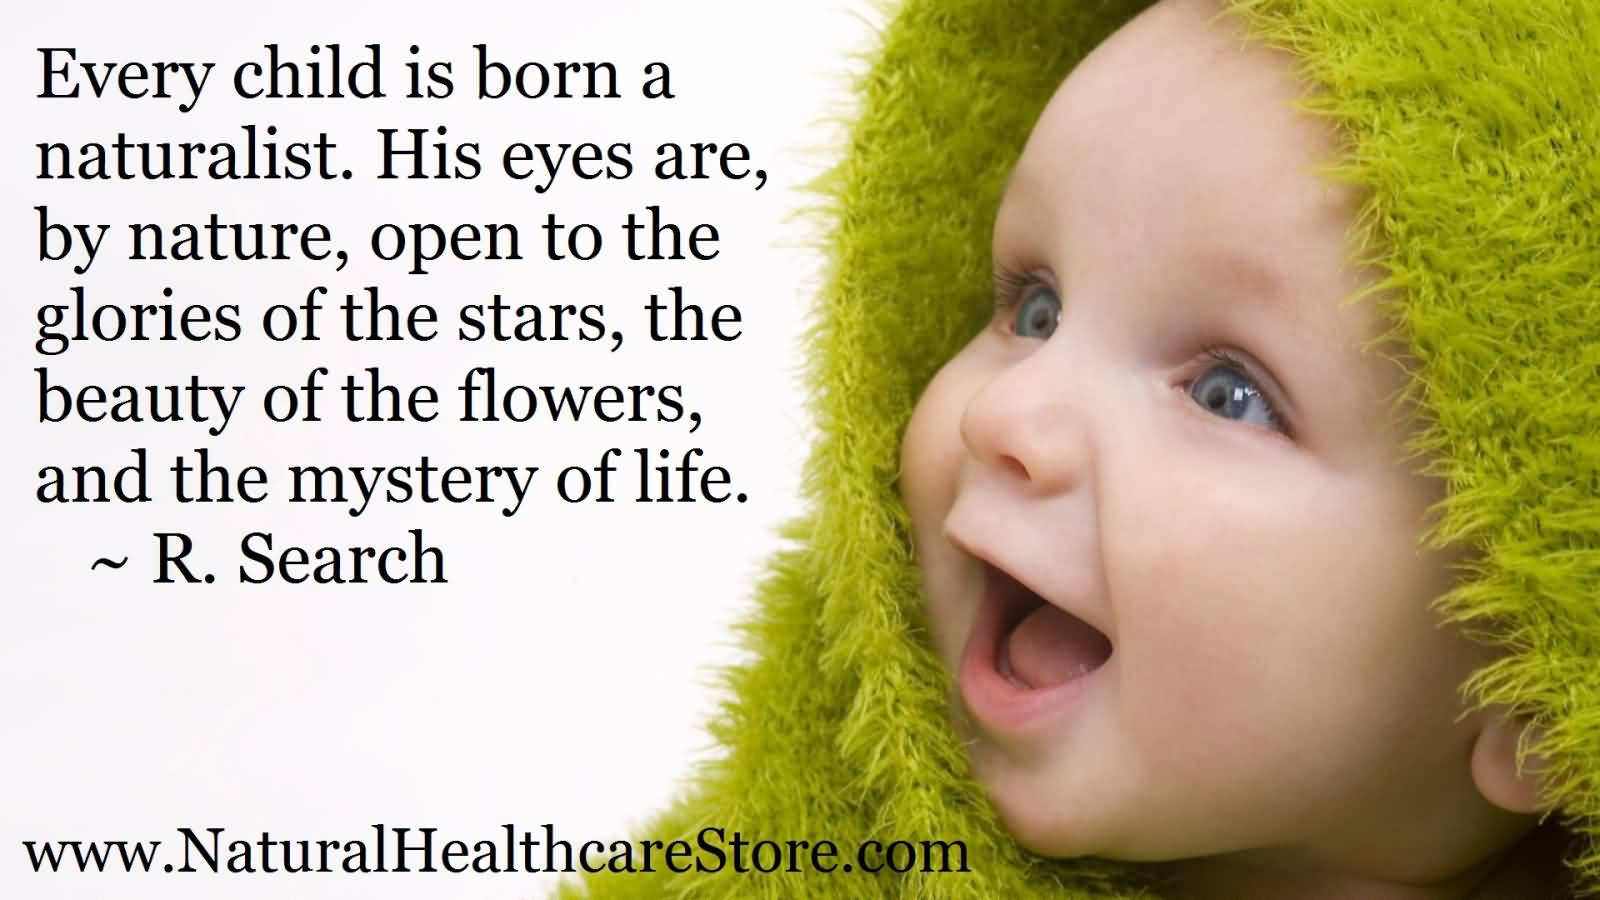 Every child is born a naturalist. His eyes are, by nature, open to the glories of the stars, the beauty of the flowers, and the mystery of life -R. Search